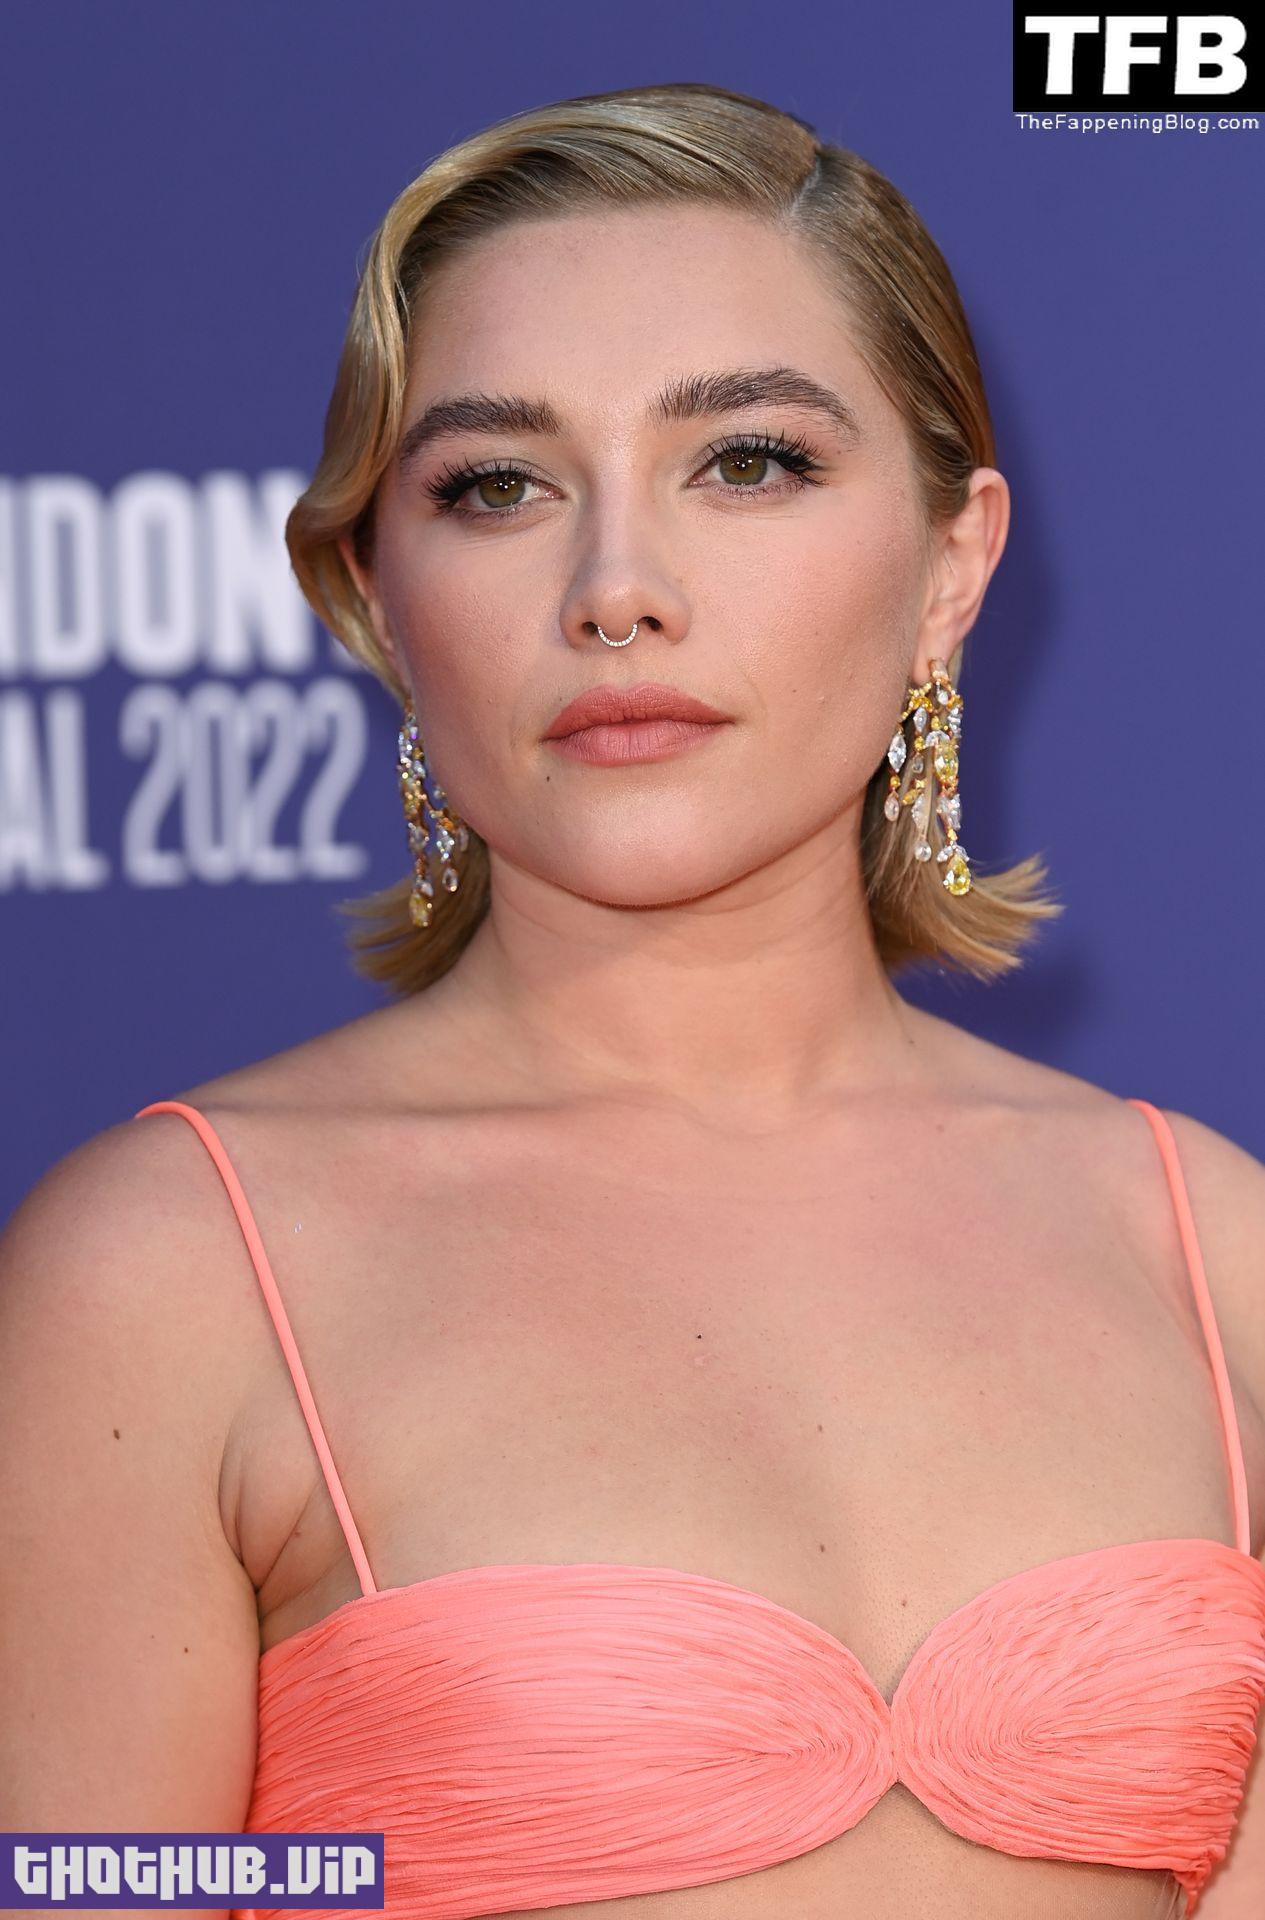 Florence Pugh Sexy The Fappening Blog 20 1